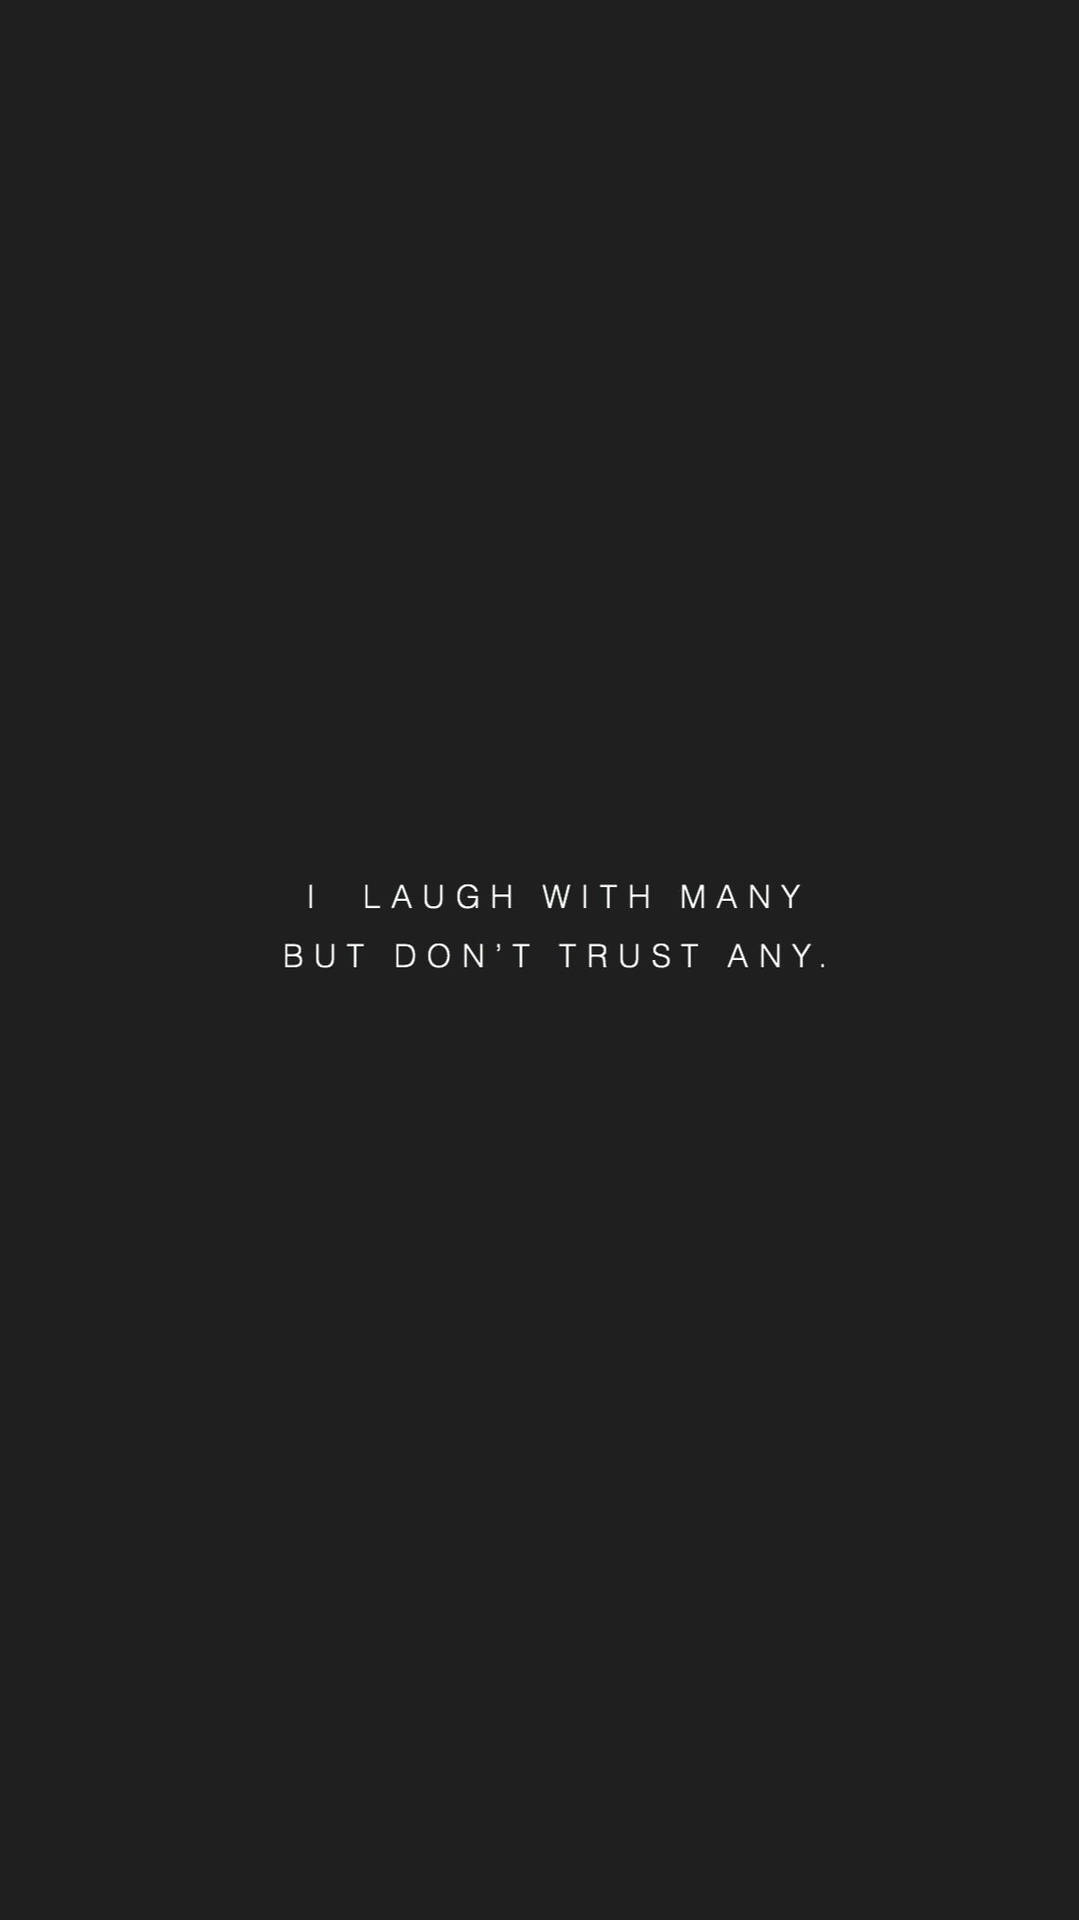 Download Black Background Sad Aesthetic Quote Wallpaper